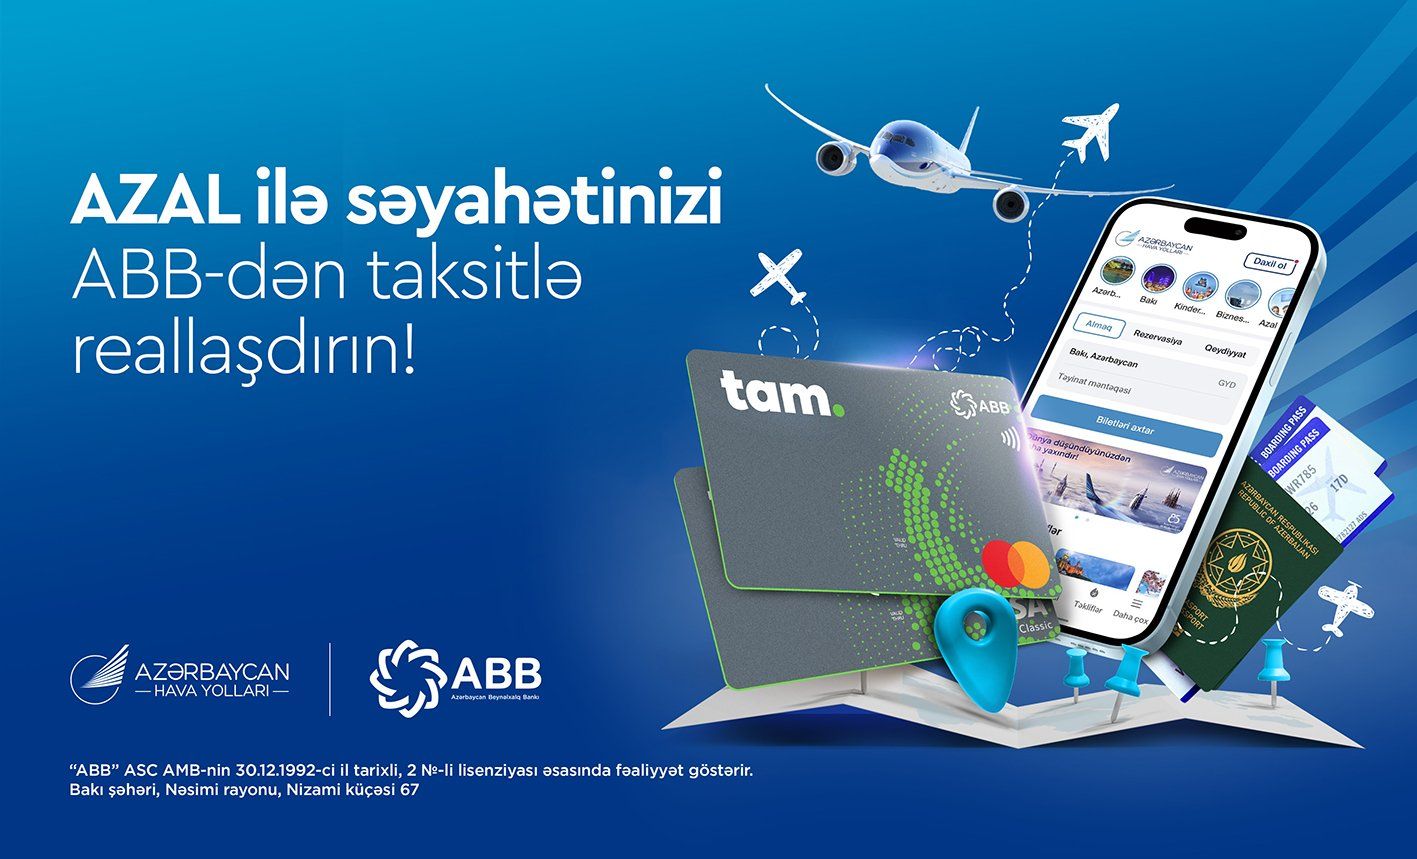 New offer from AZAL and ABB: purchase tickets in installments now